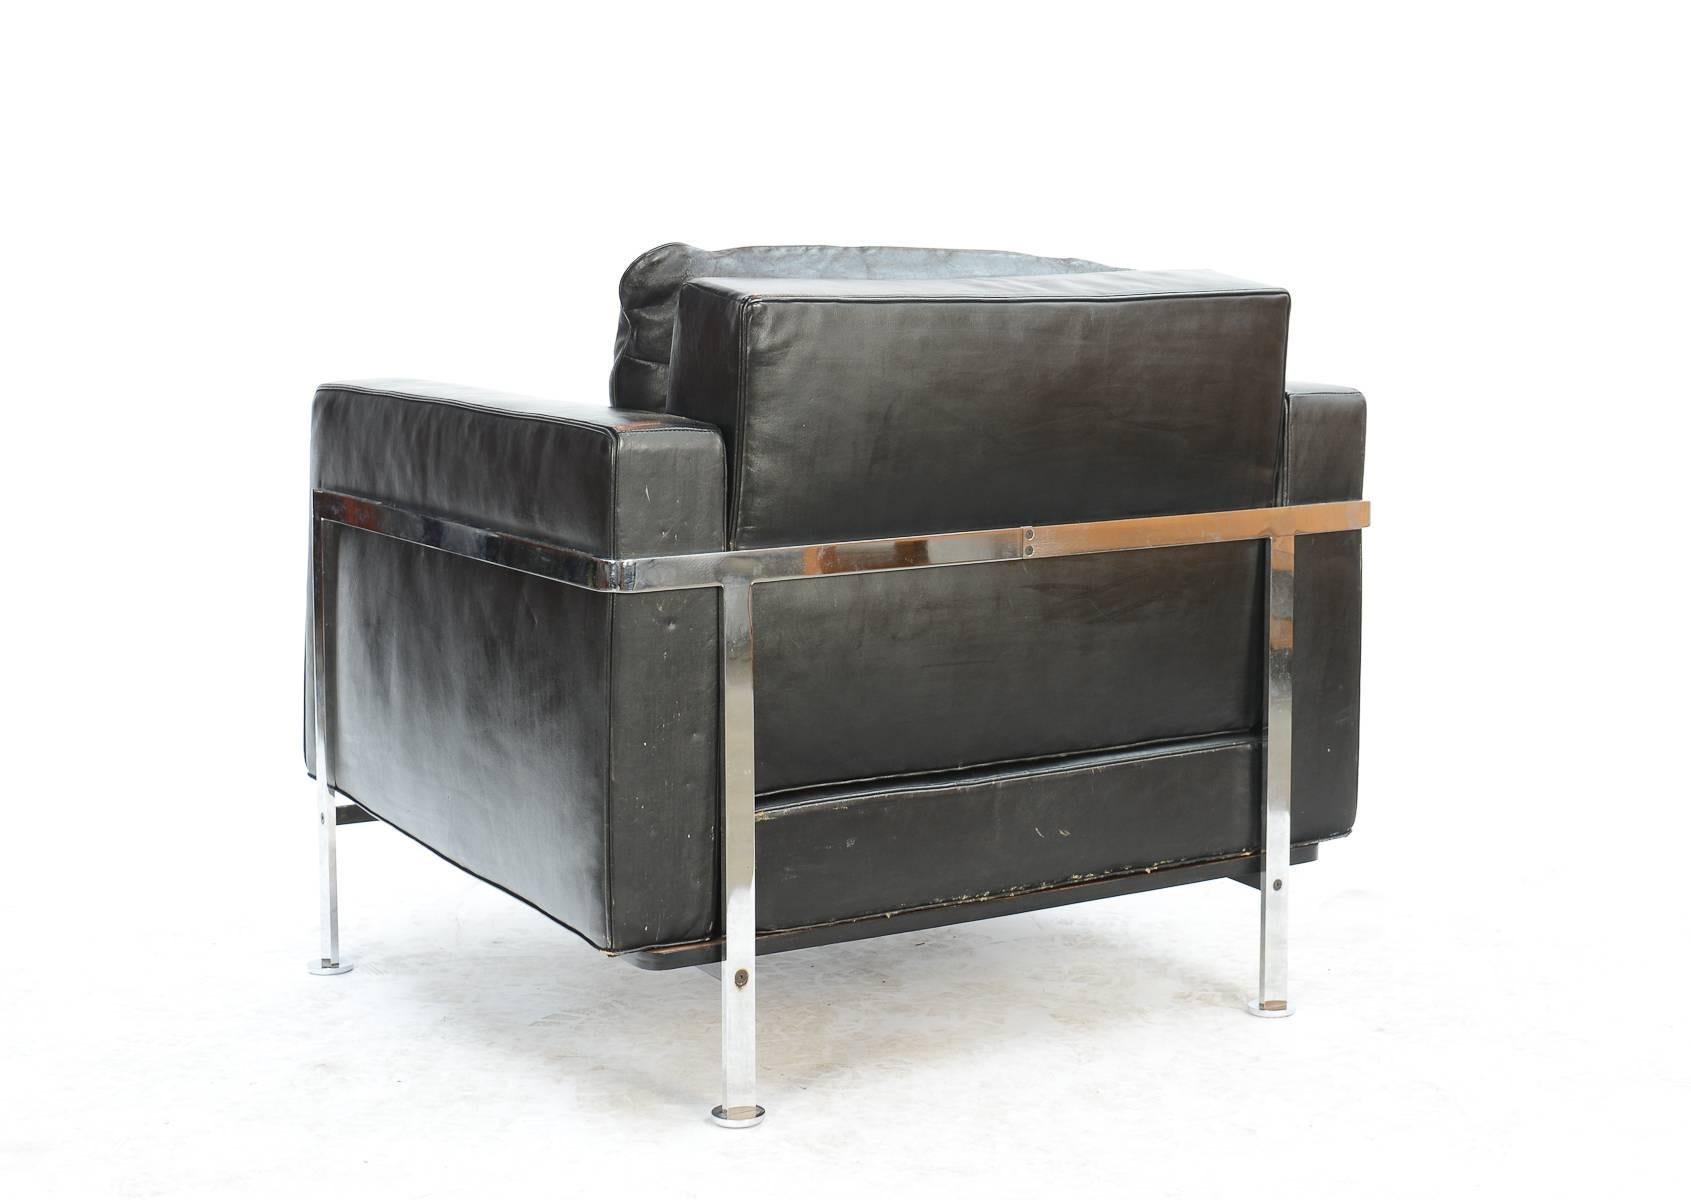 A wonderful club chair from Swiss design teak Trix and Robert Haussmann in it's original, distressed black leather on a chromed steel frame.

Arm height is 18 inches. Inside seat dimensions are 25 inches wide by 21 inches deep.

  